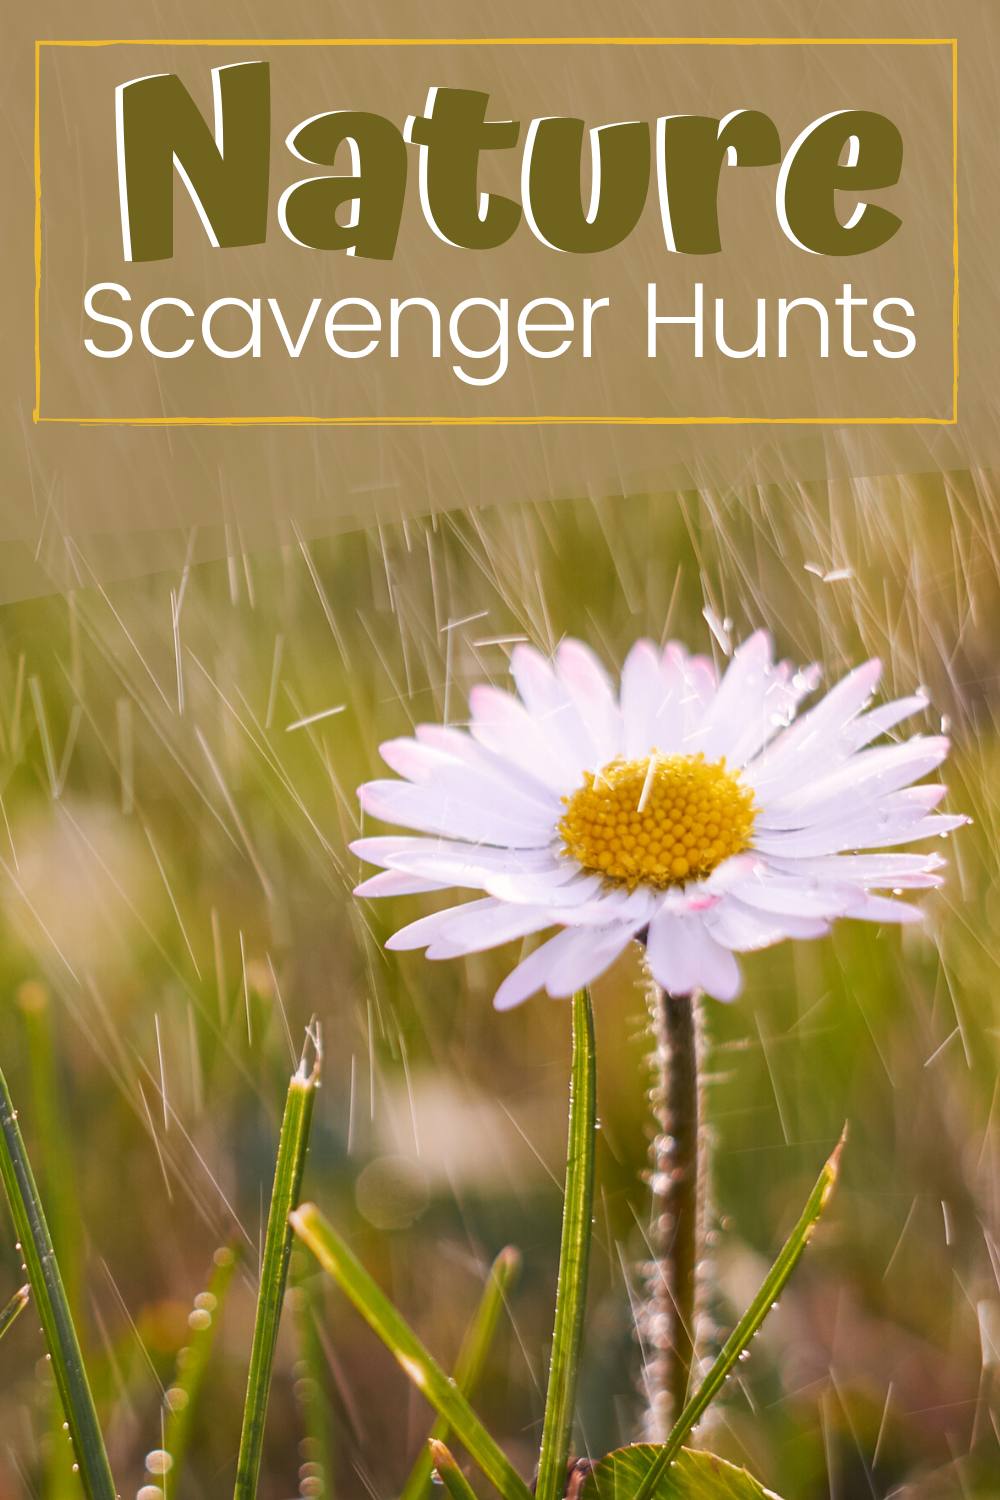 As the weather begins to warm up, why don't you plan some nature scavenger hunts for the kids? They can be done in the neighborhood or backyard.